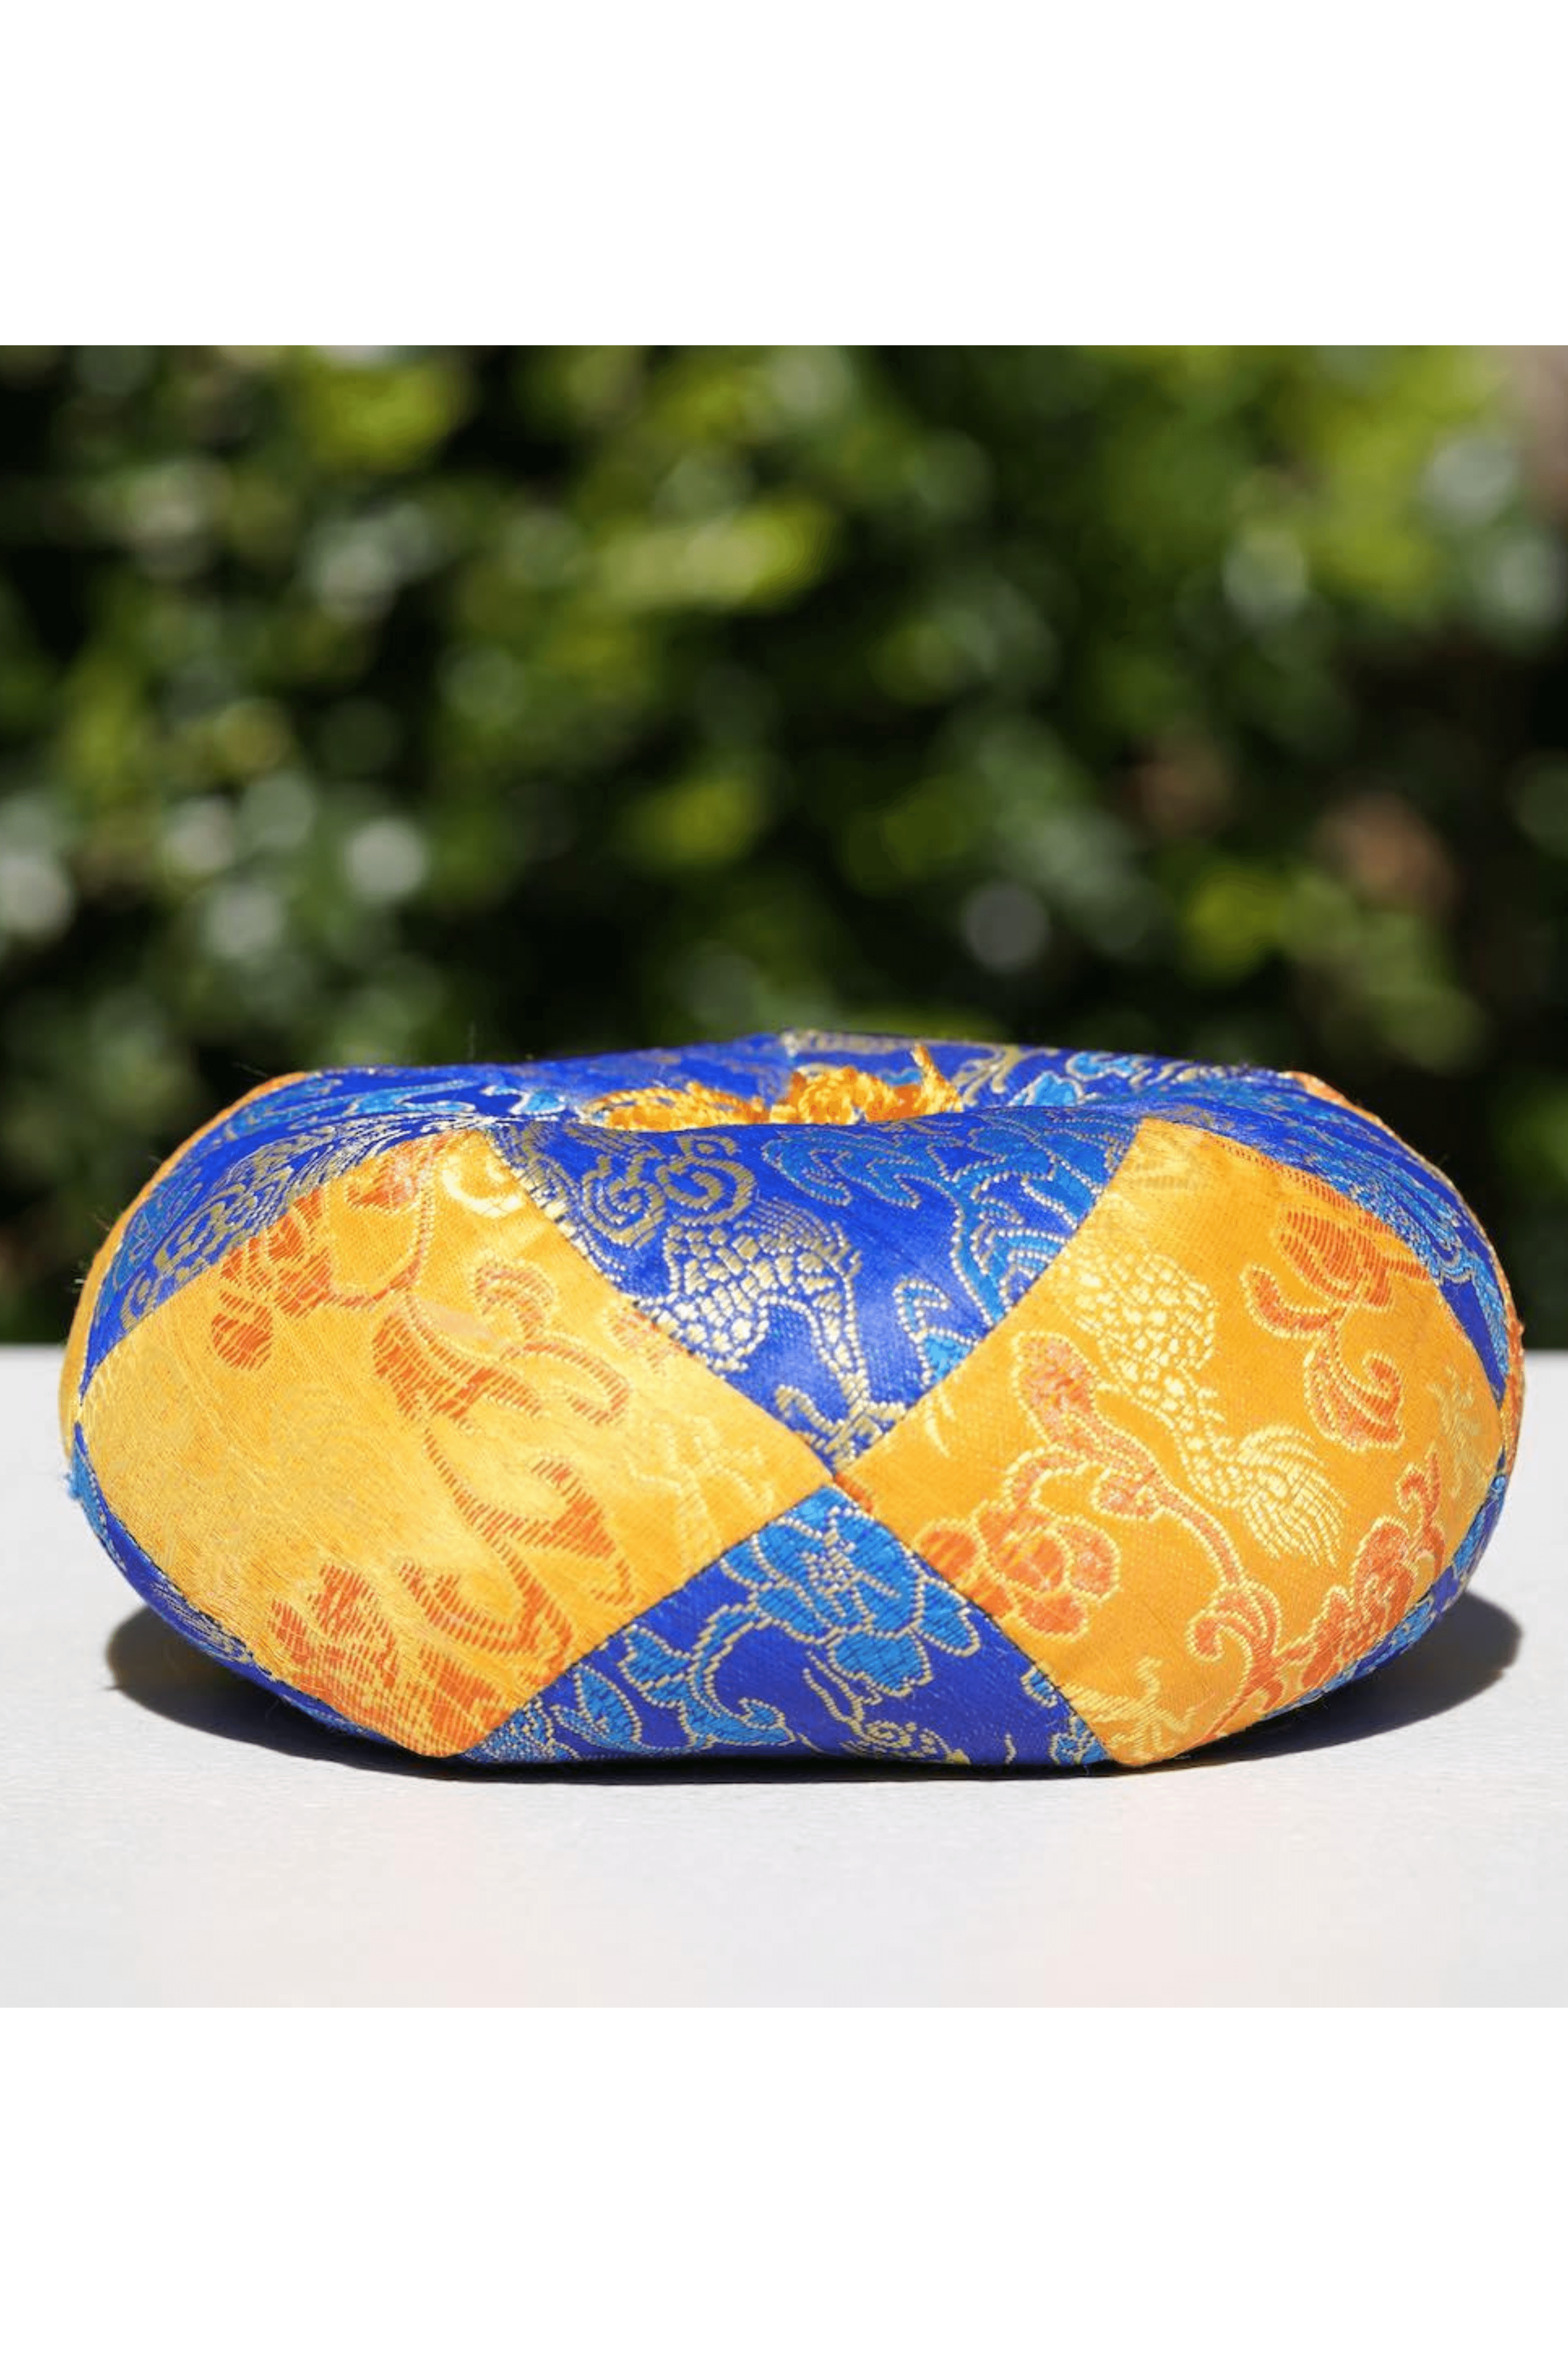 Cushion in Singing bowl accessories - Himalayas Shop